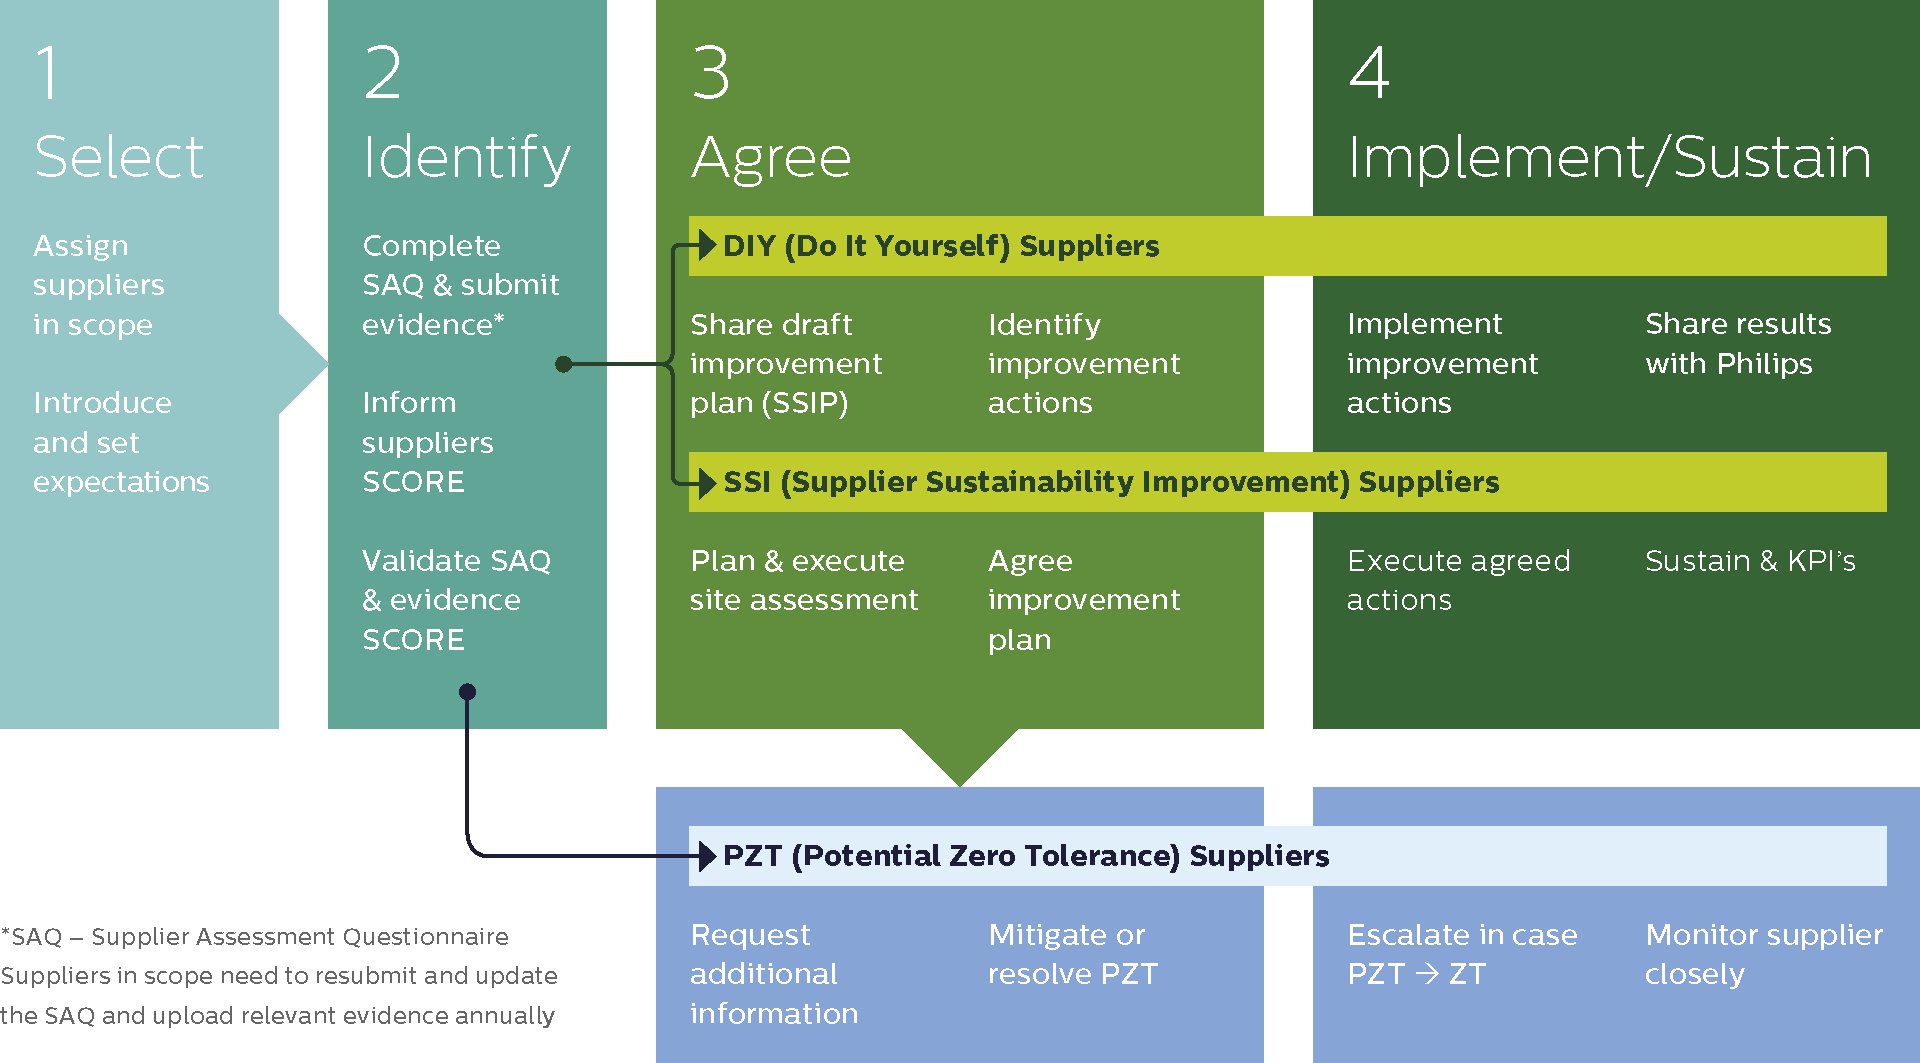 This visual shows Philips’ Supplier Sustainability
Performance (“Beyond Audit”)